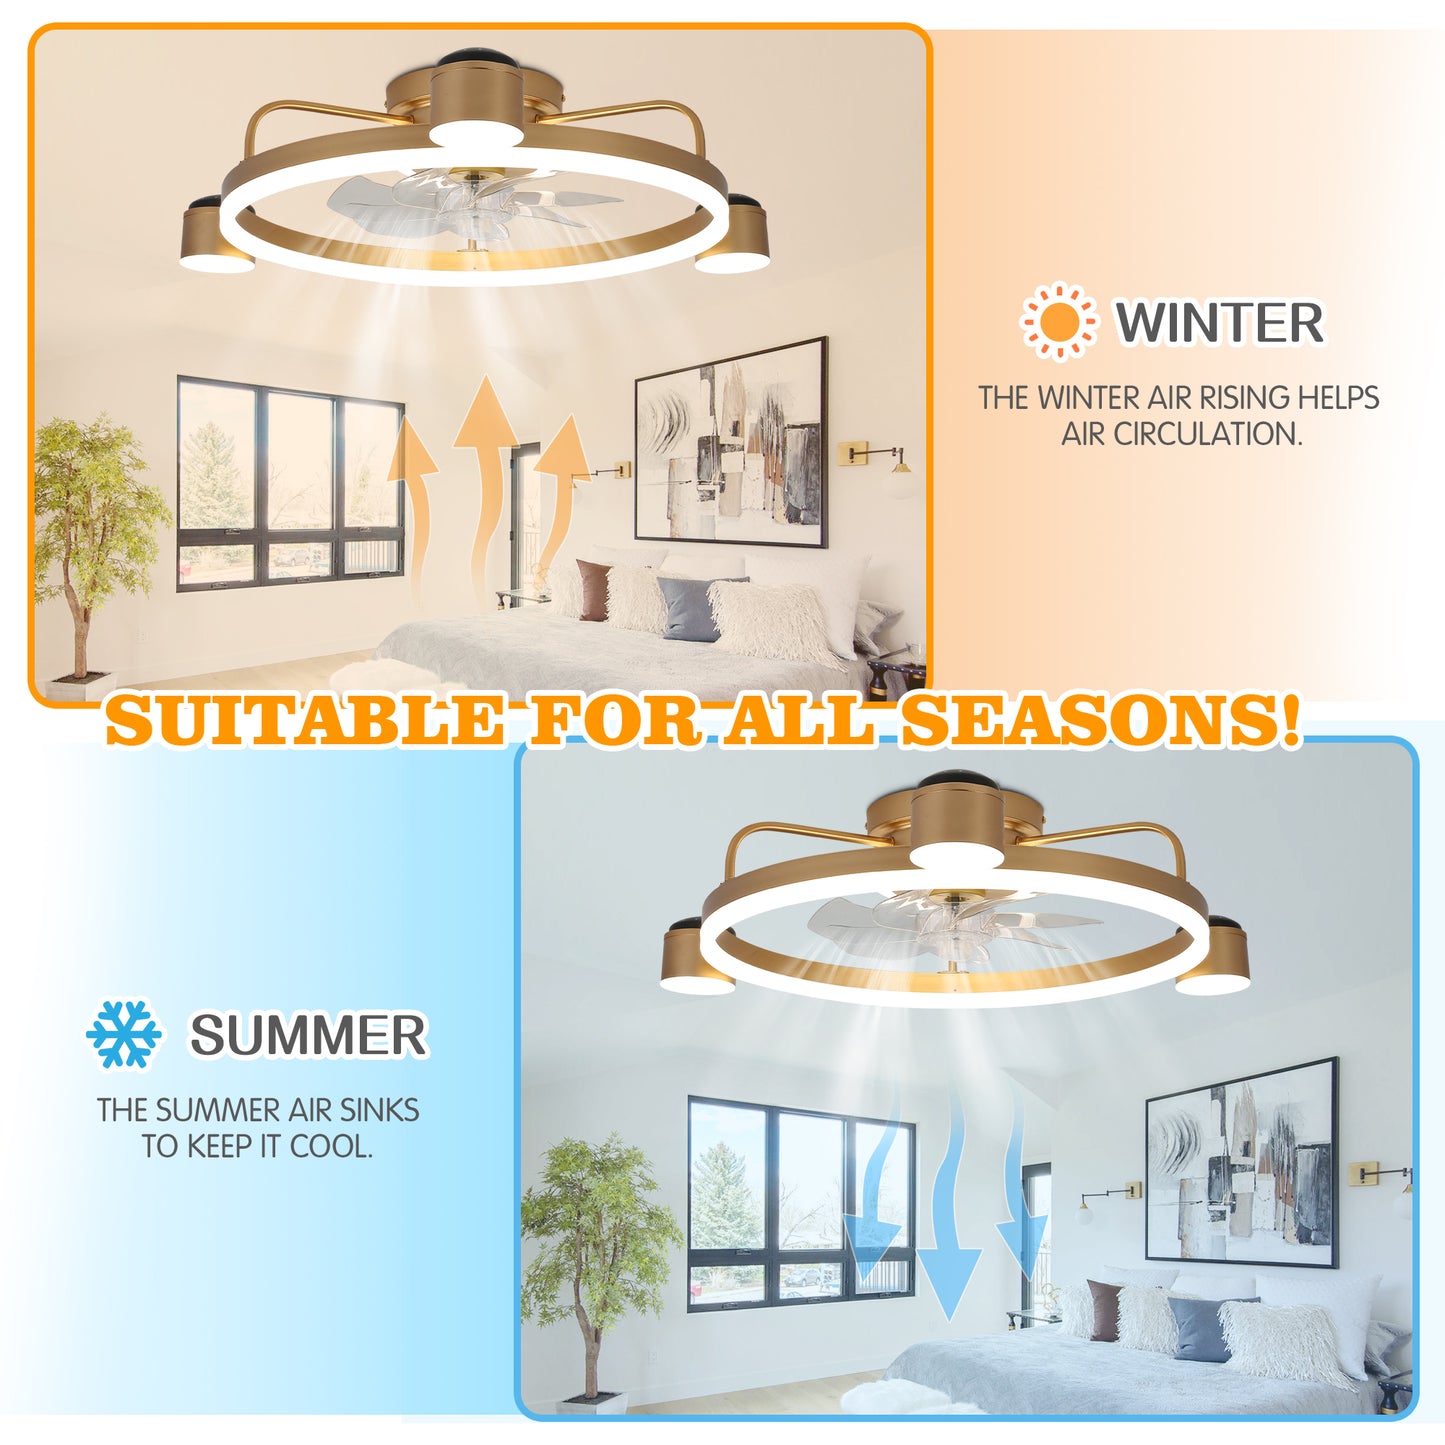 28 in. Starry Night Light Dimmable Ceiling Fan with Light and Remote, Reversible Blades